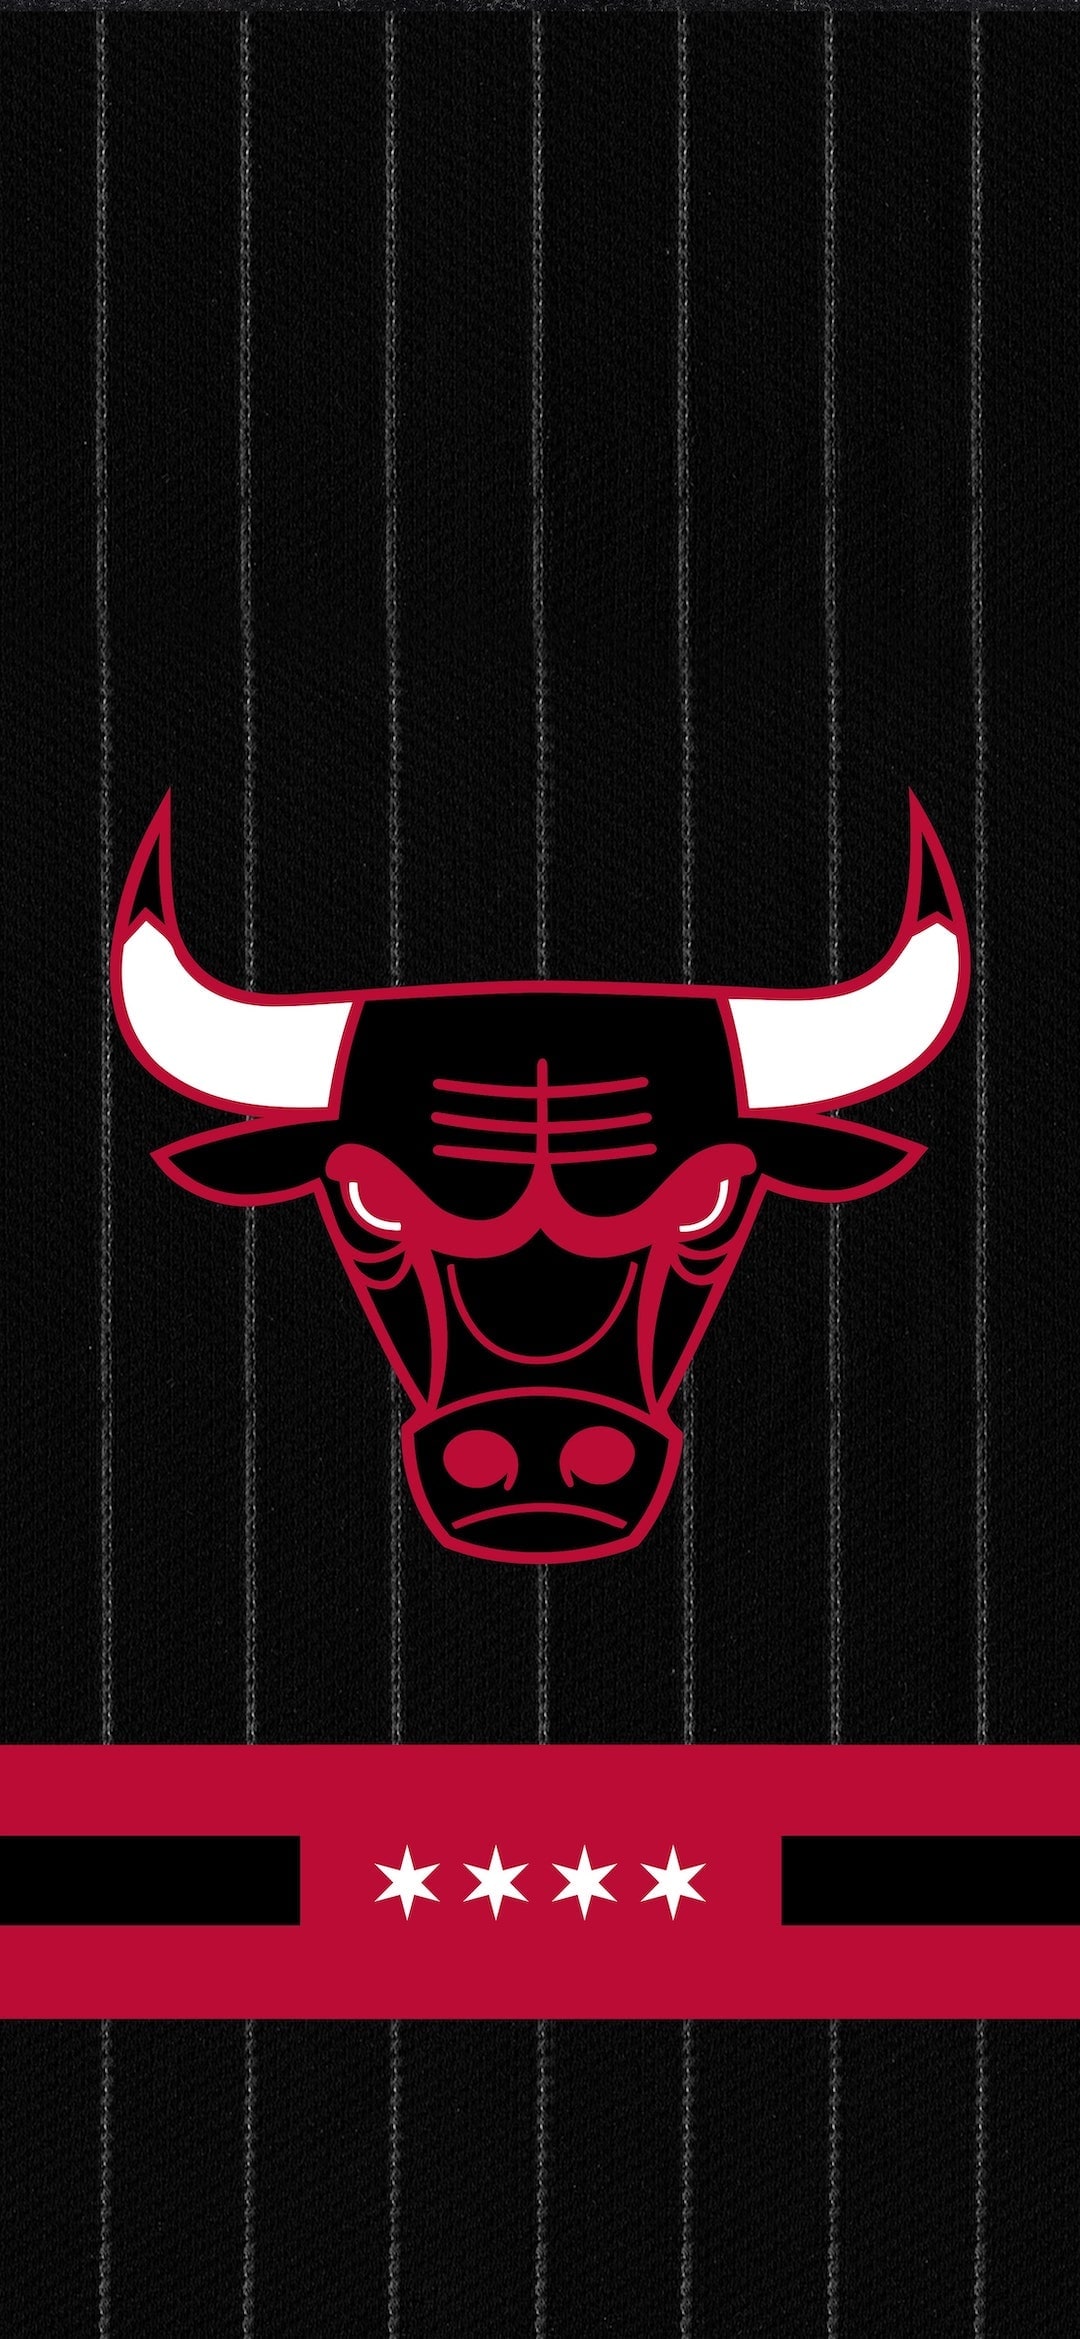 Made an iPhone wallpaper based on the 2019 city edition jerseys! :  r/chicagobulls